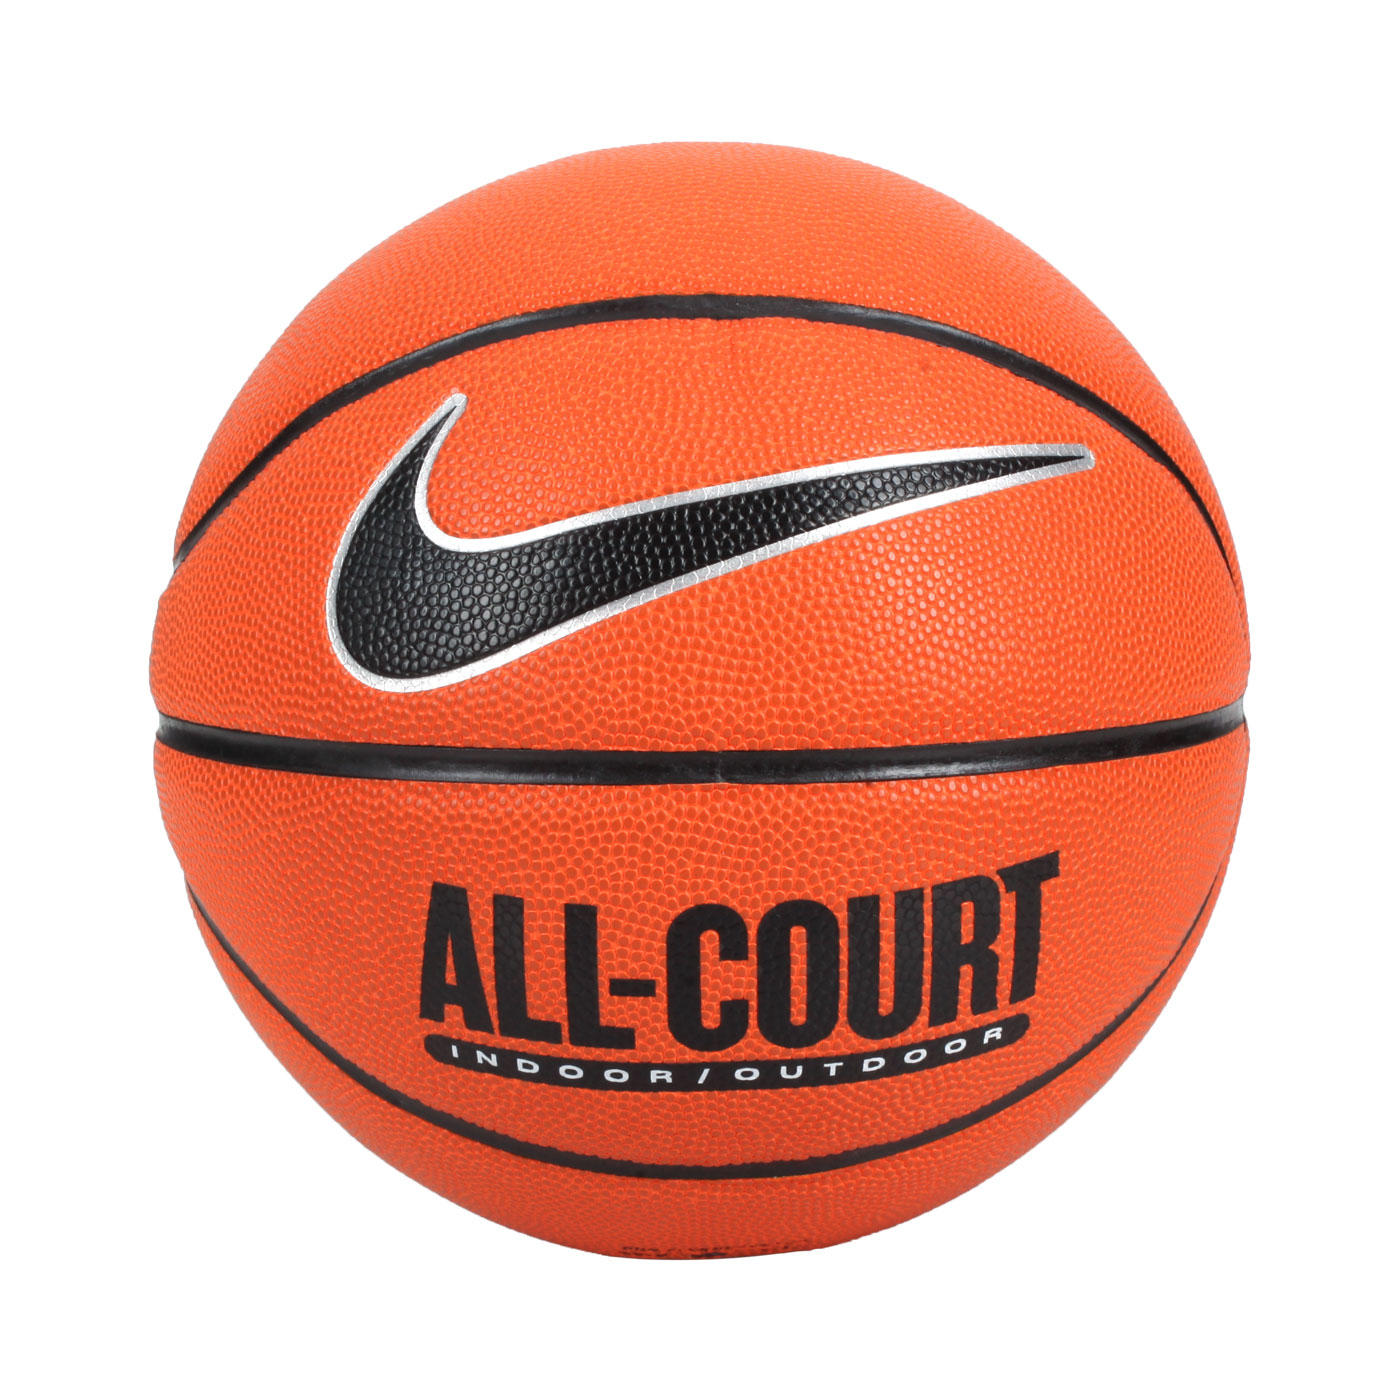 NIKE EVERTDAY ALL COURT 8P 6號籃球 N100436985506